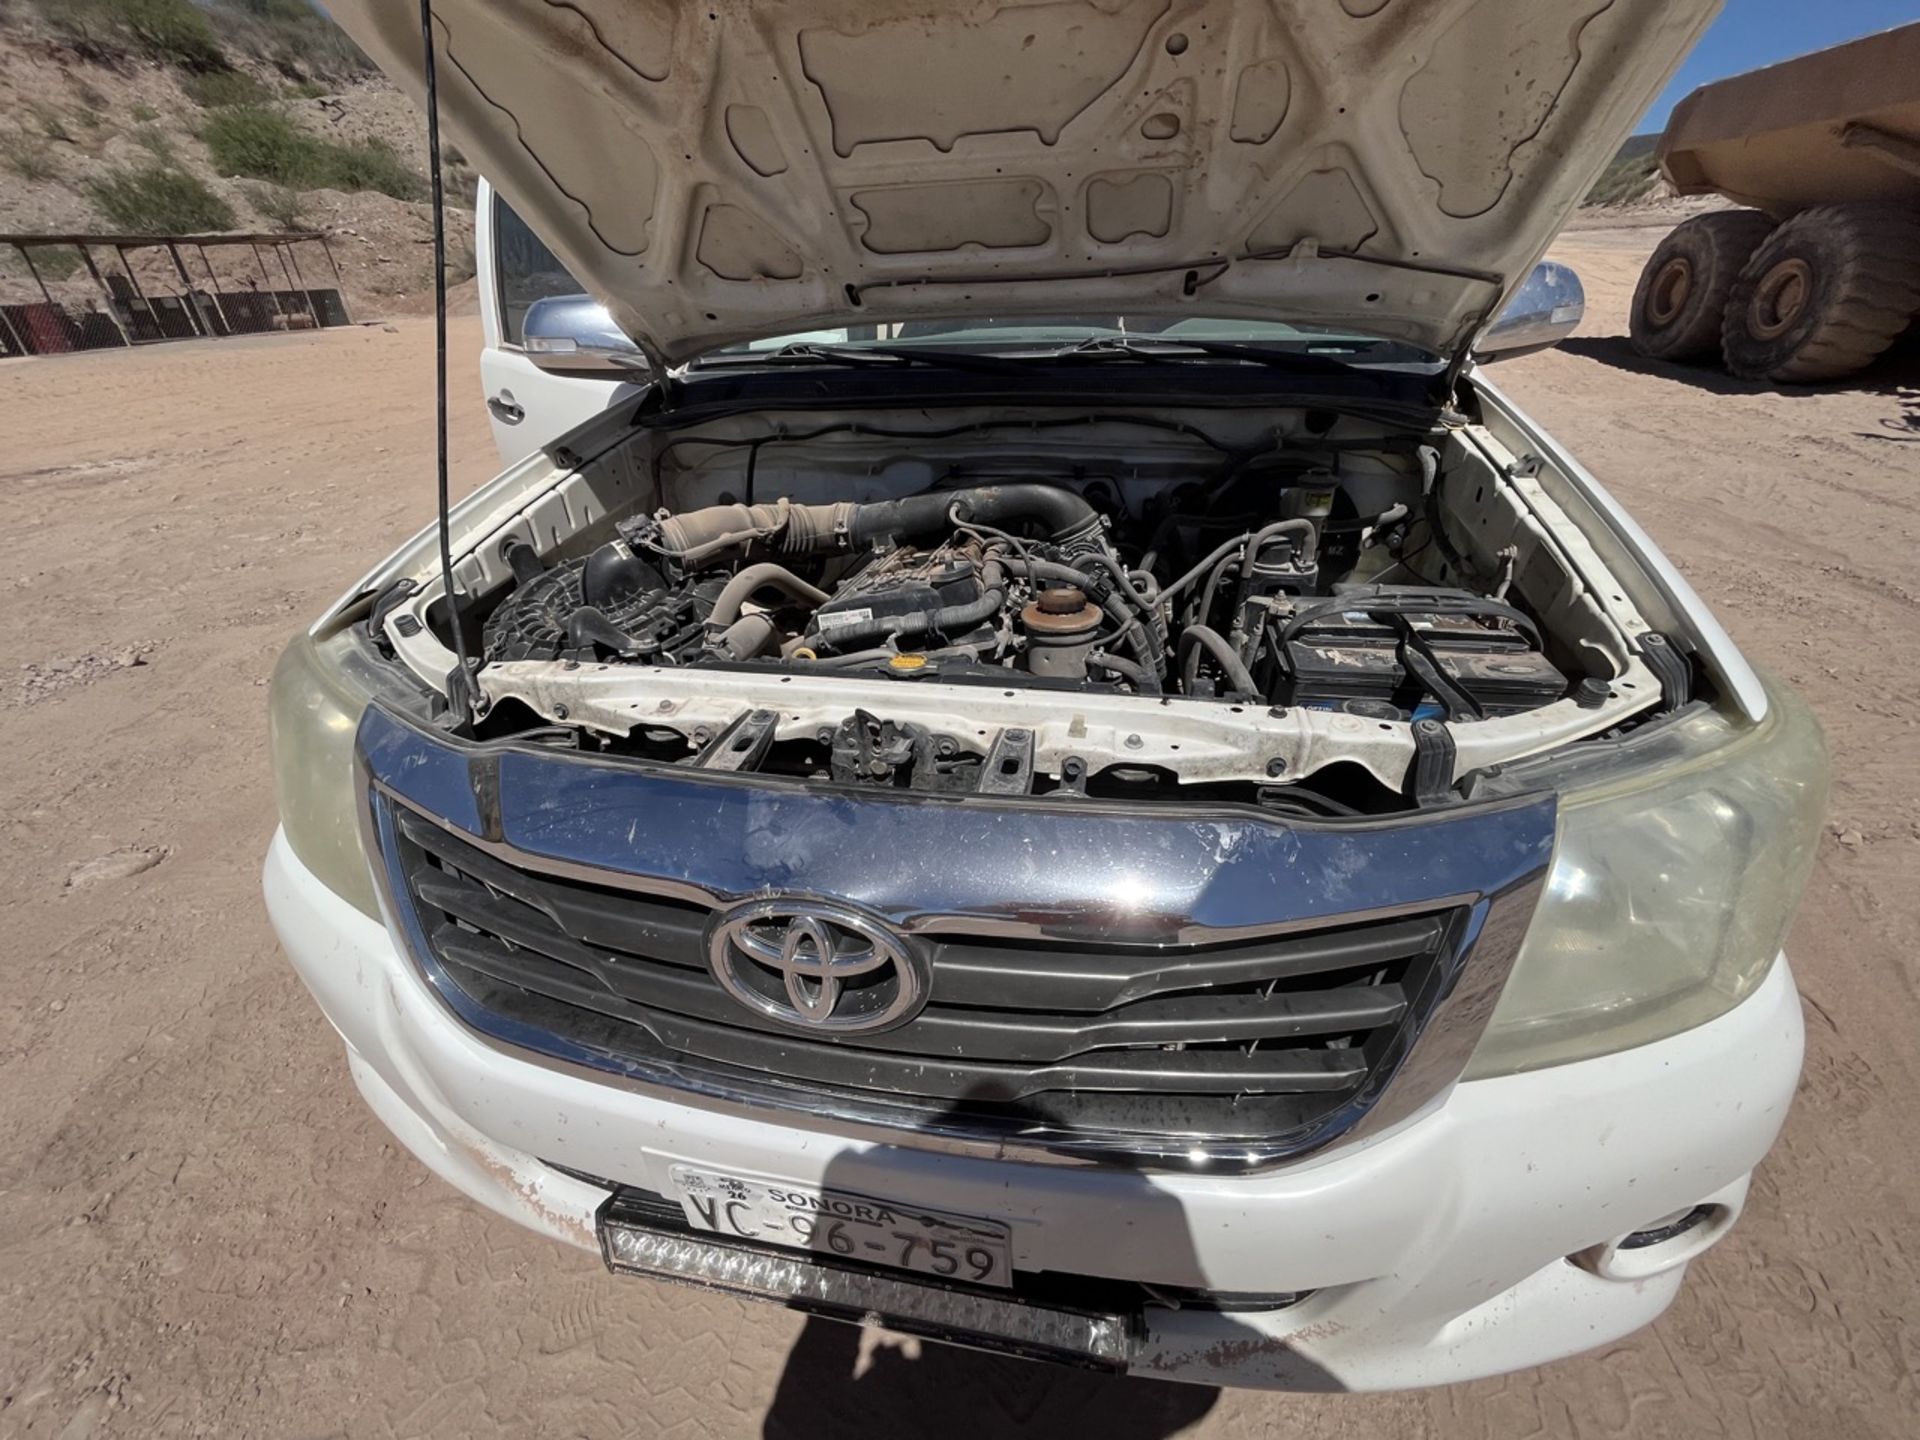 Vehicle Toyota Hilux, Pick Up Double cab white color, Serial MR0EX32G9F0263336, Model 2015, manual - Image 41 of 42